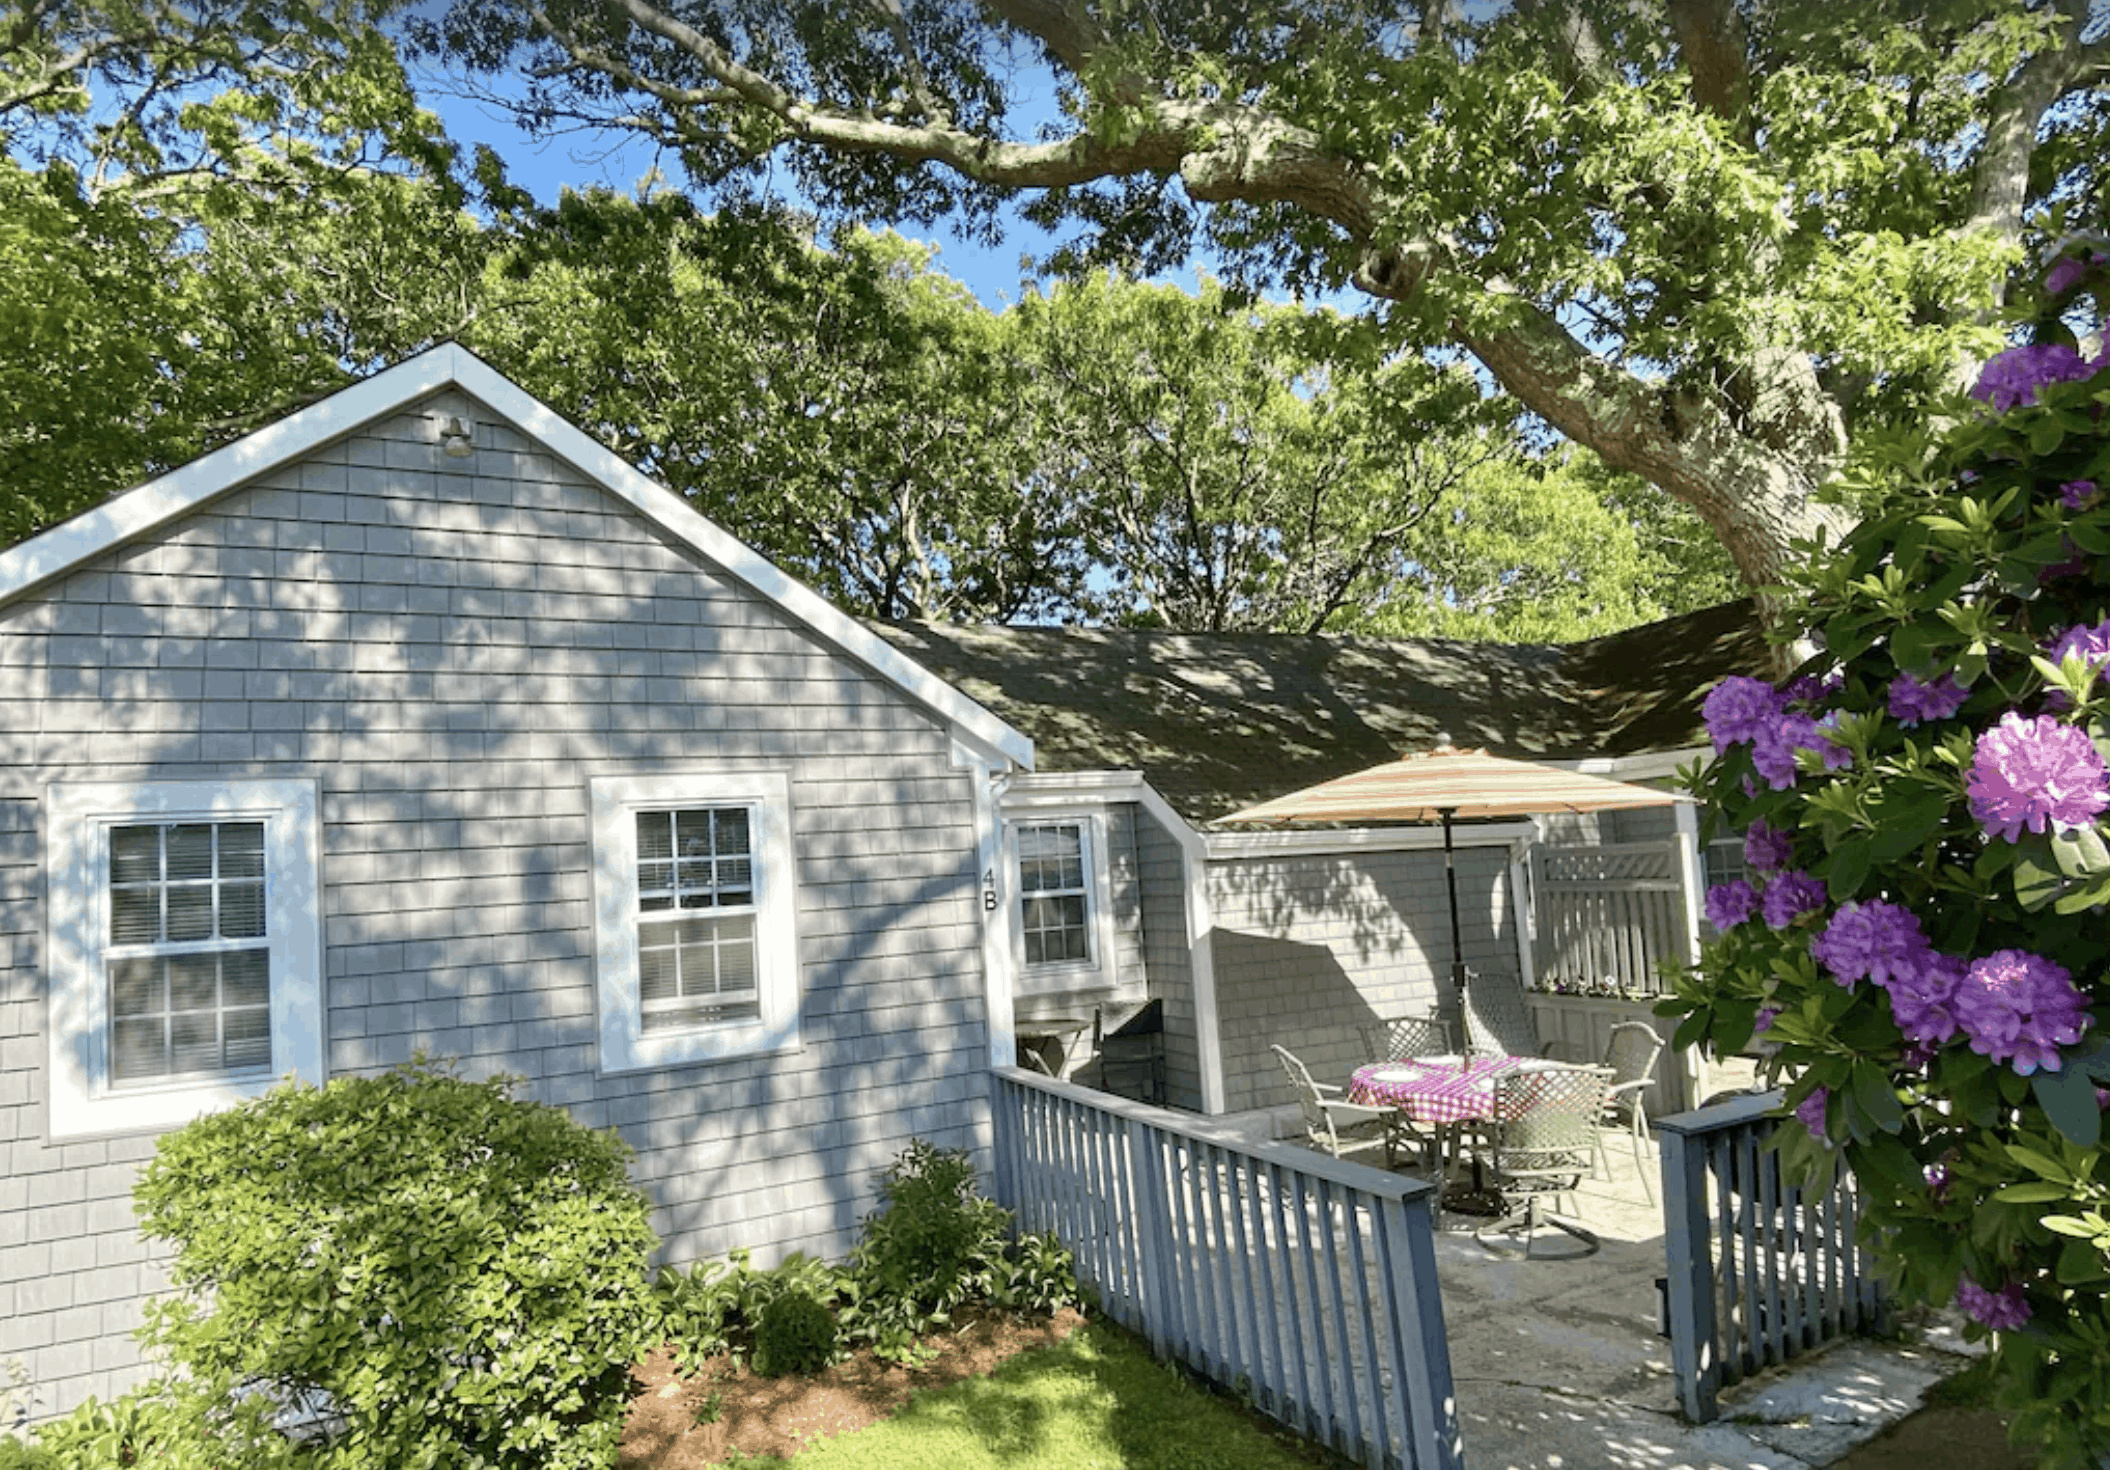 Grey house with a deck and a table with an umbrella; trees all around.